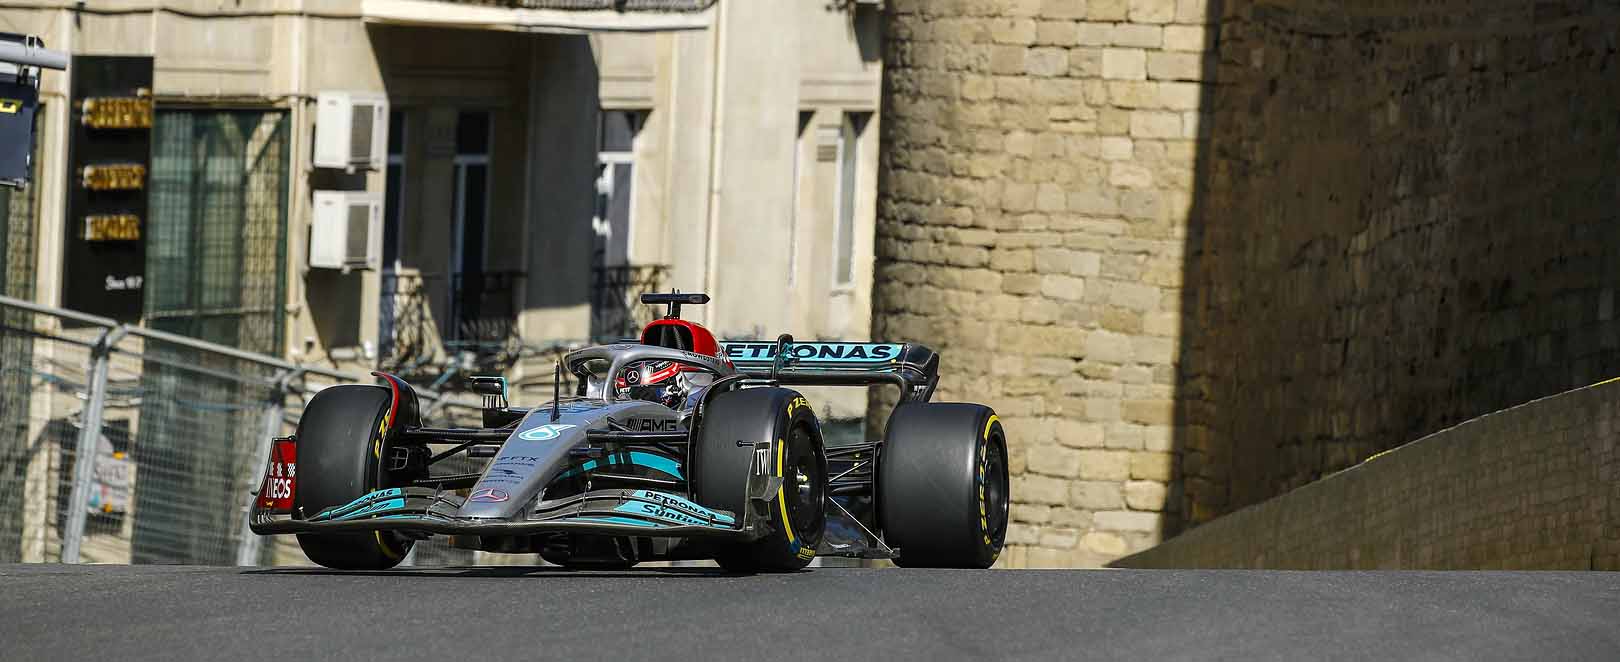 George Russell's Mercedes F1 car on track at the Baku City Circuit 